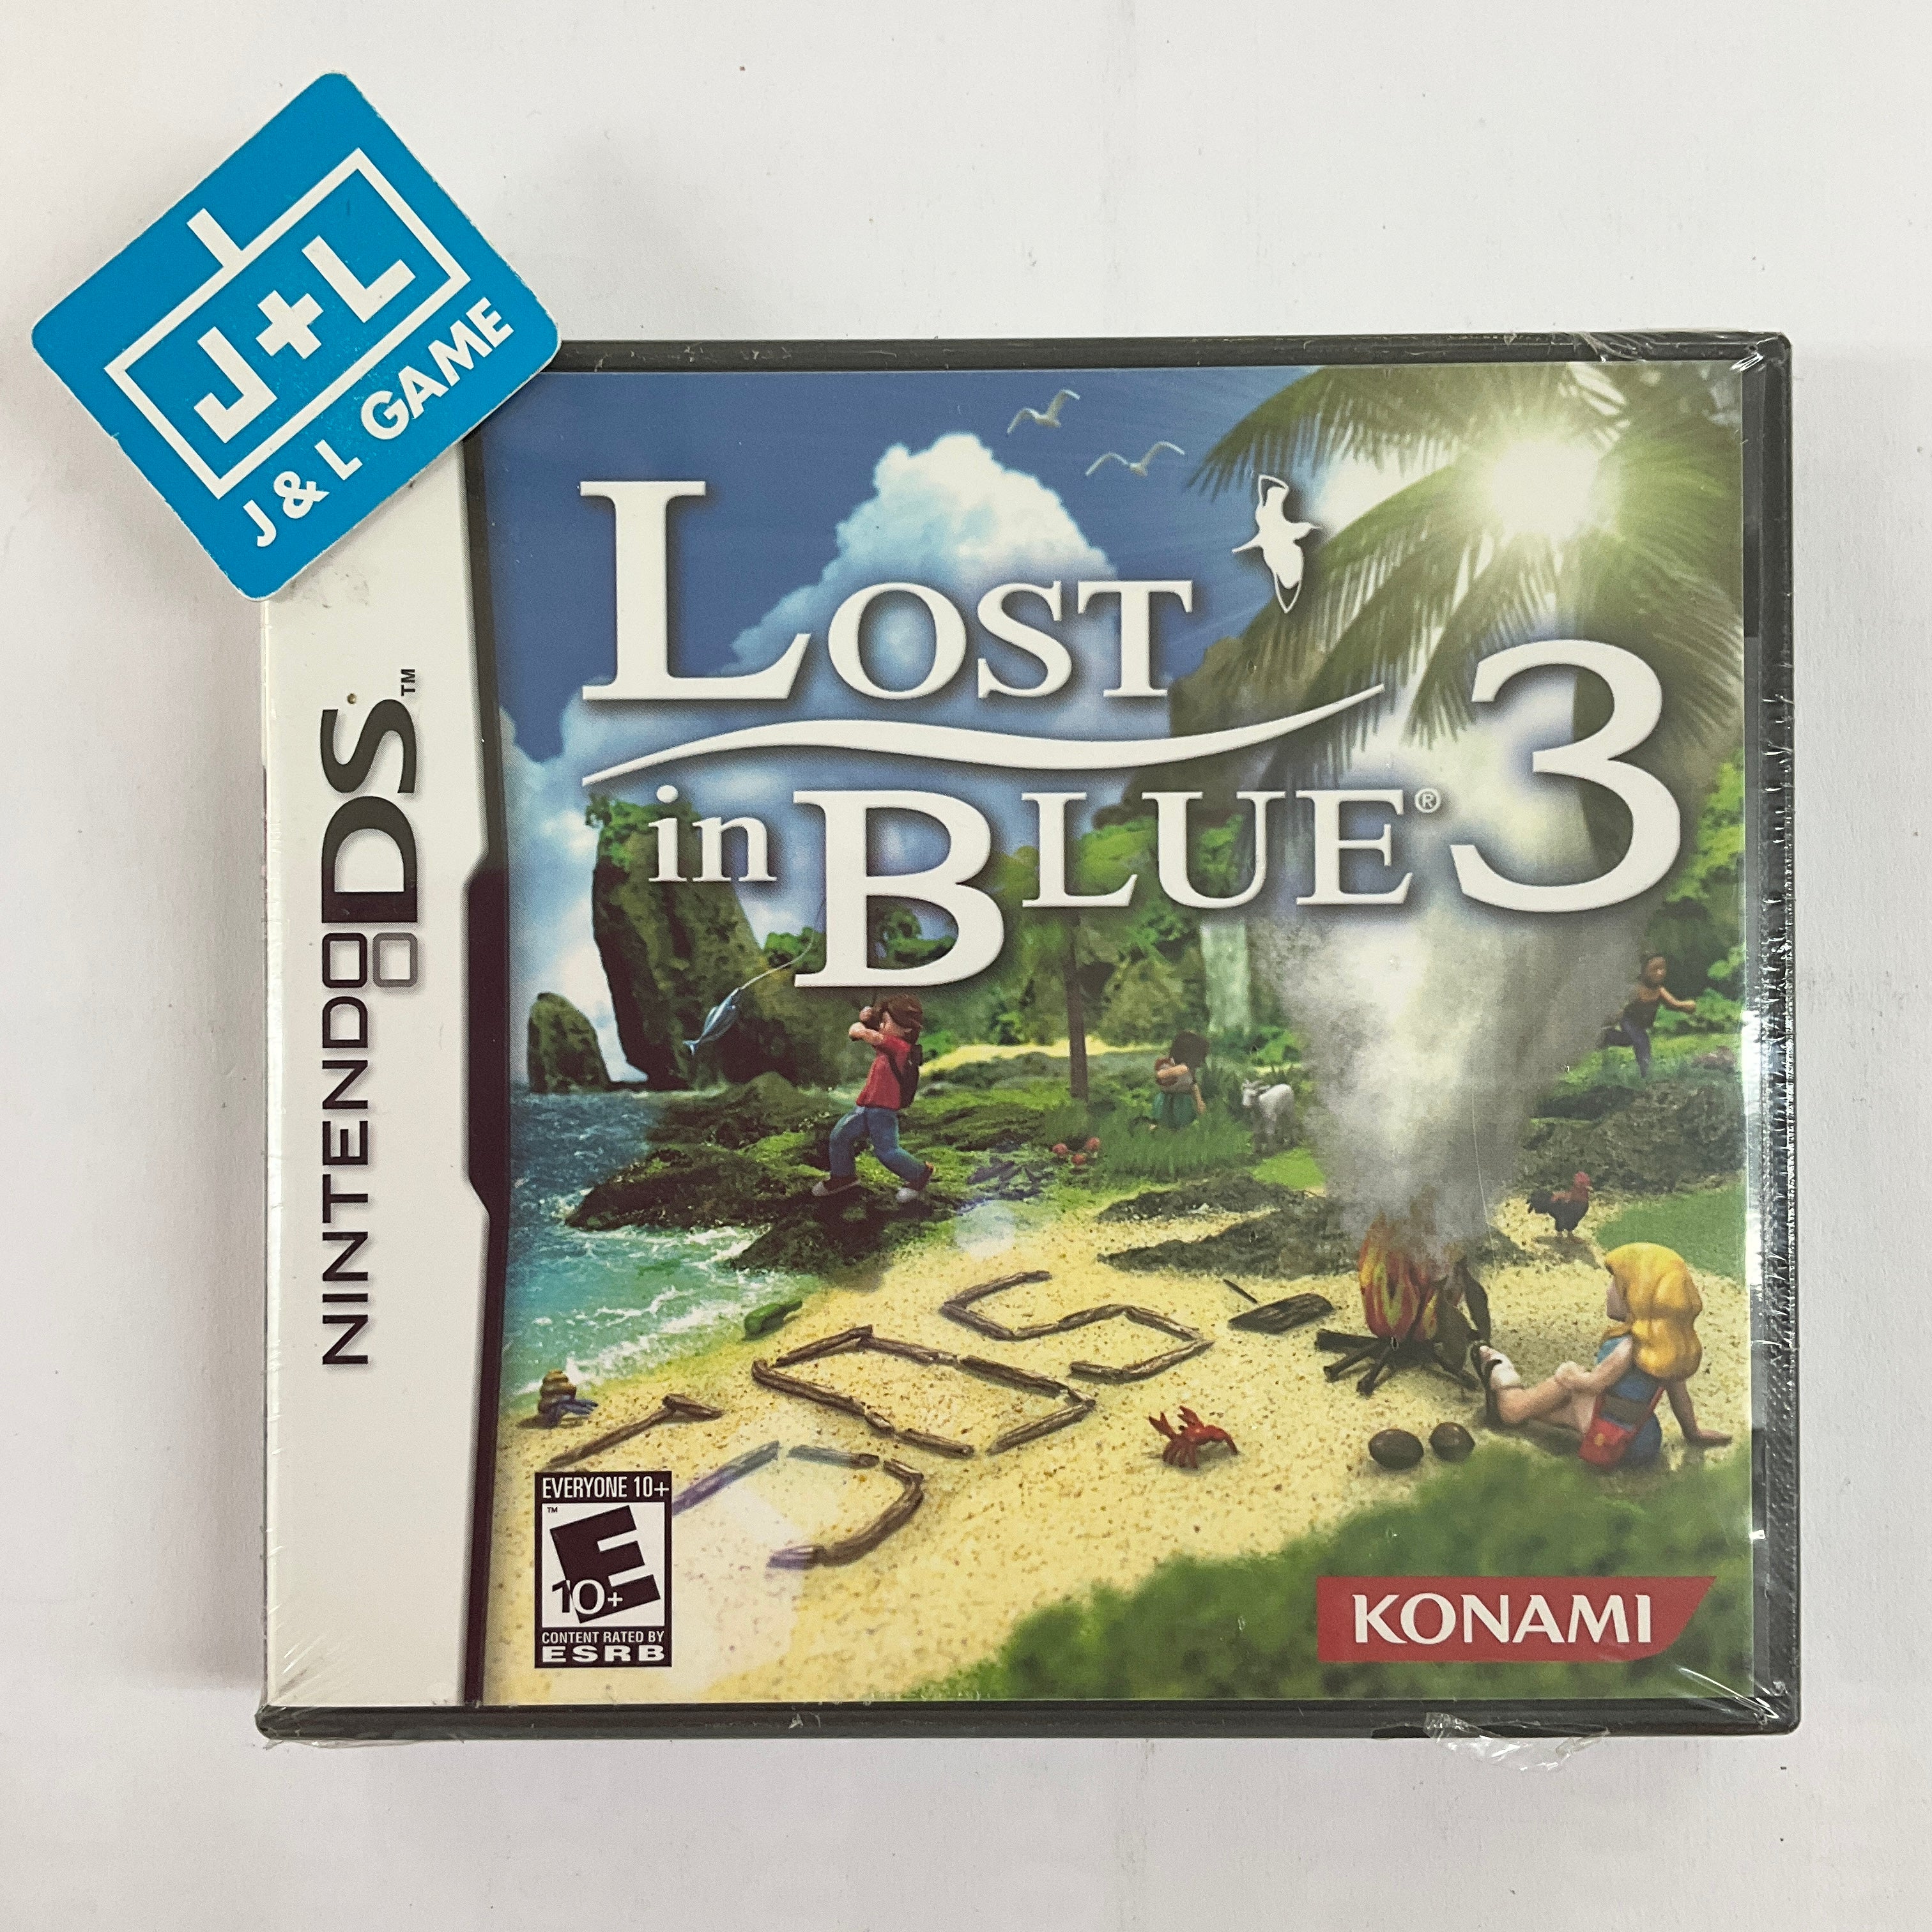 Lost In Blue 3 - (NDS) Nintendo DS Video Games Konami   